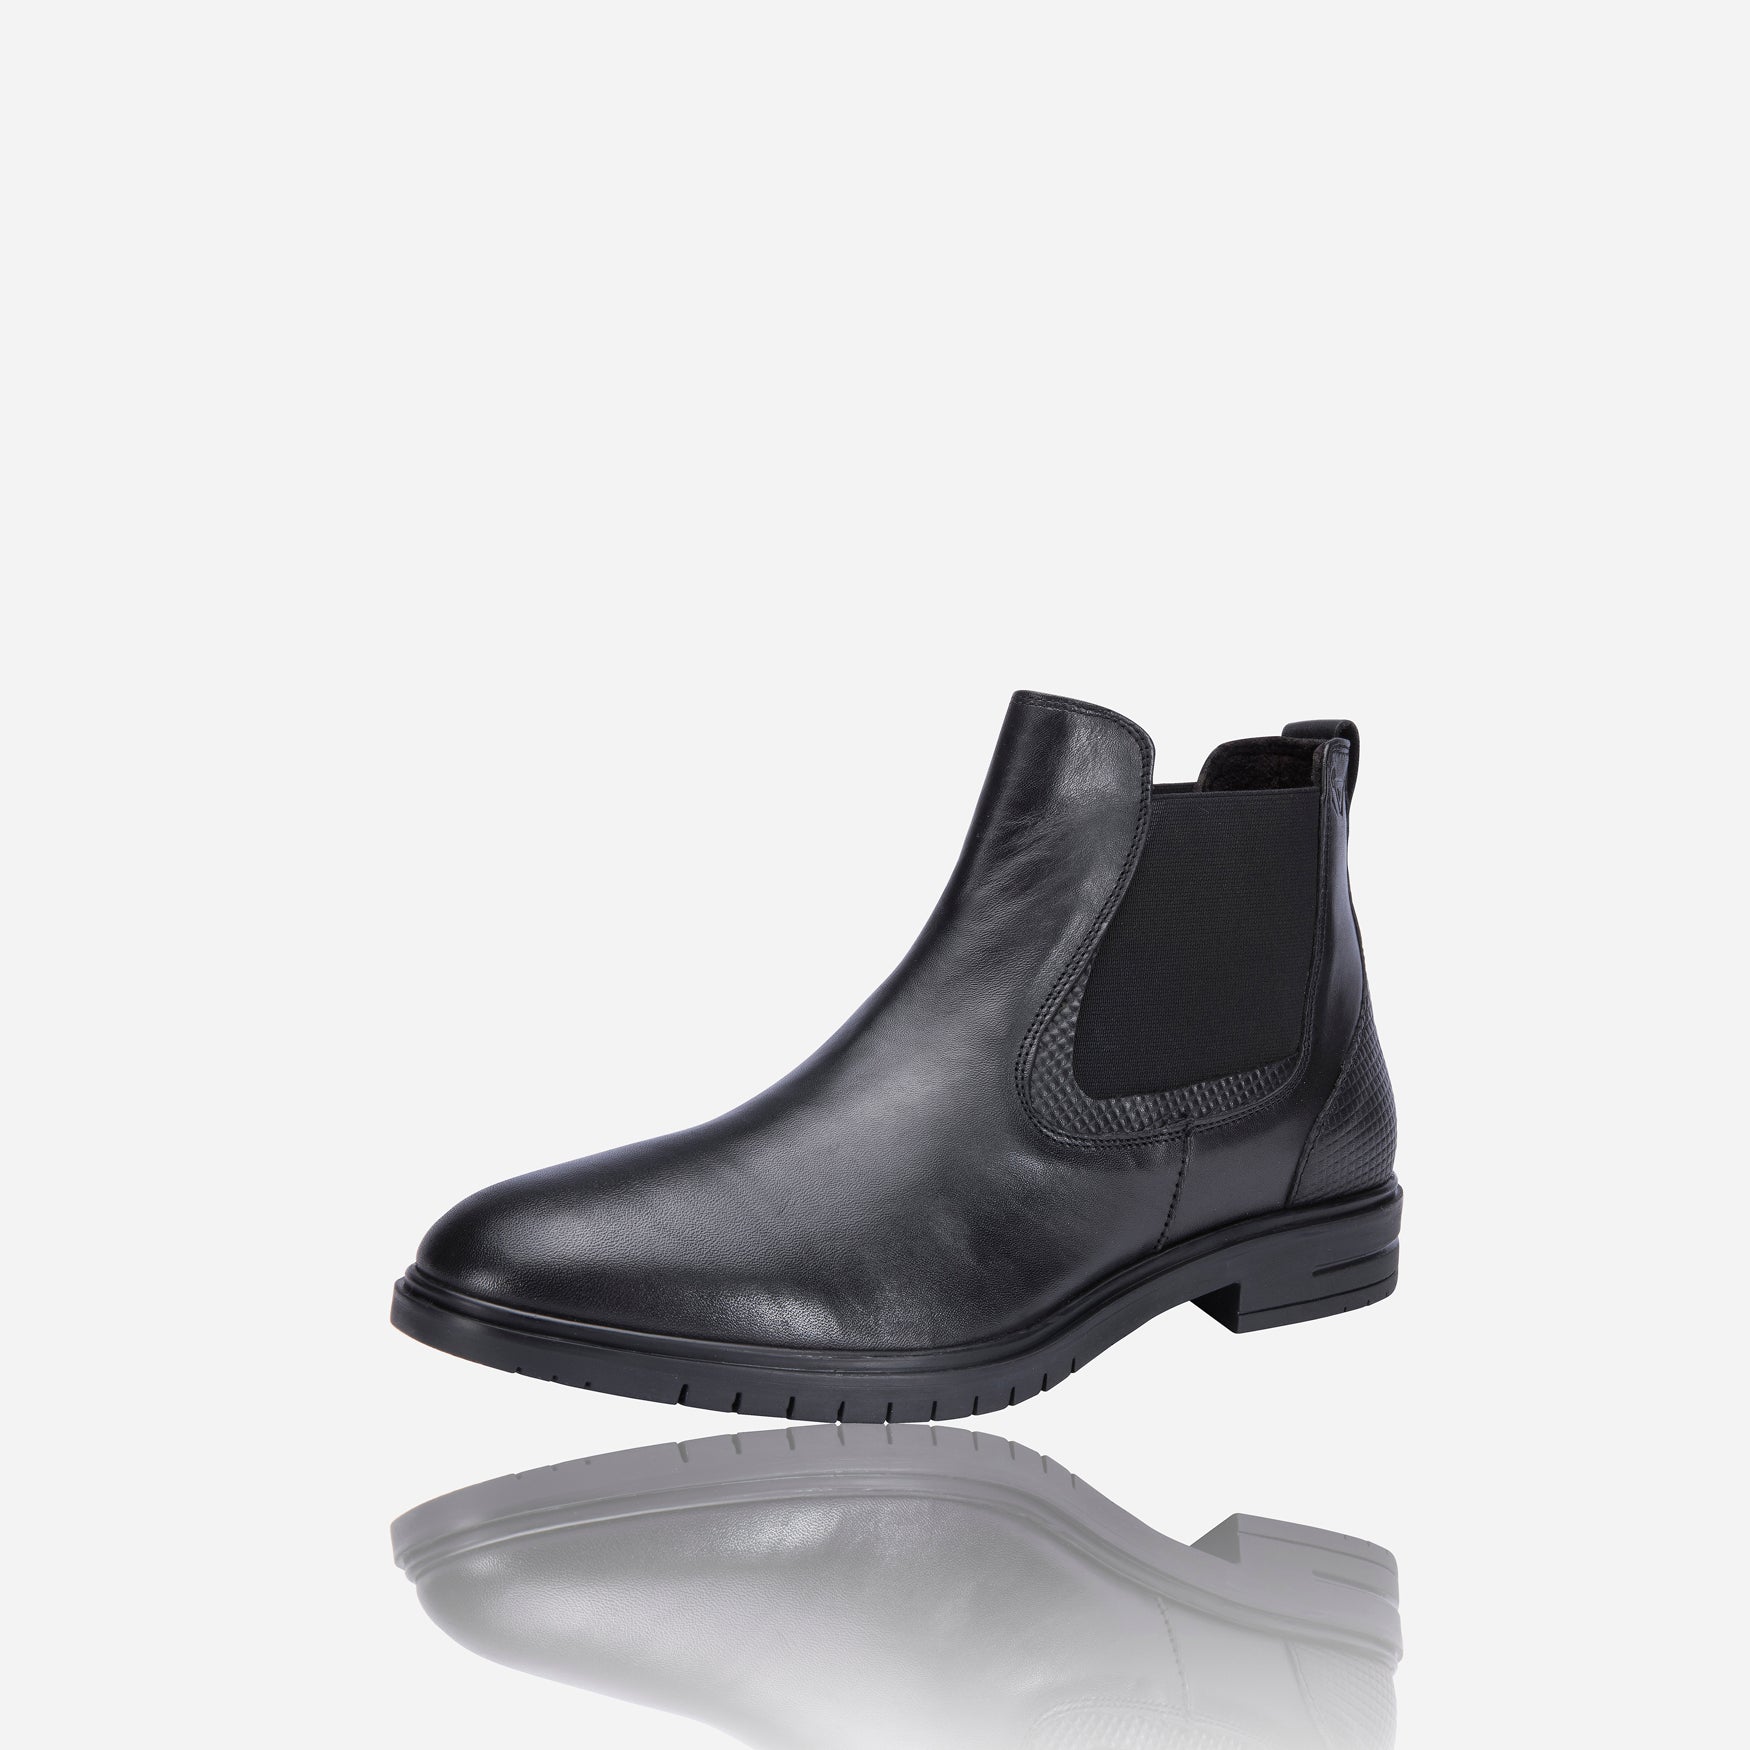 Willis Urban Chelsea Boot - Black - Leather Shoes | Brando Leather South Africa